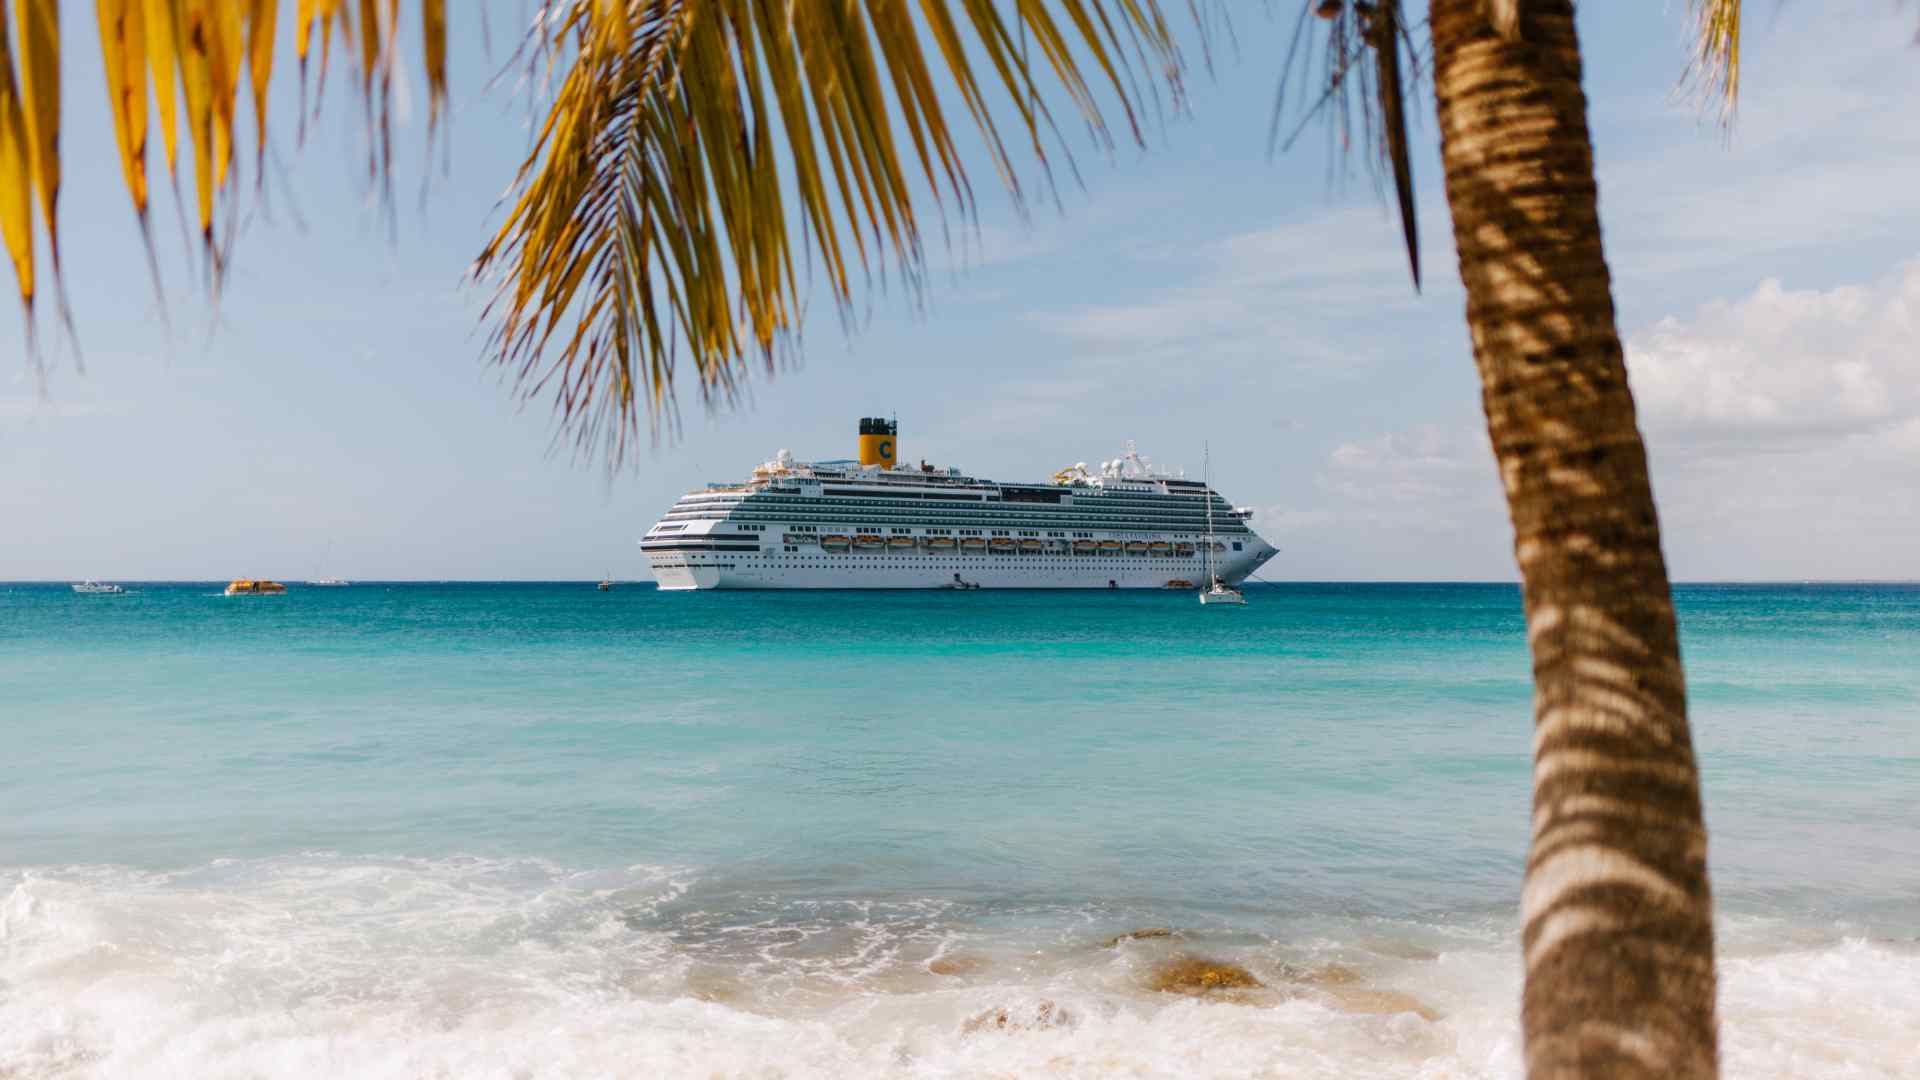 Things to Watch Out For on December Cruises